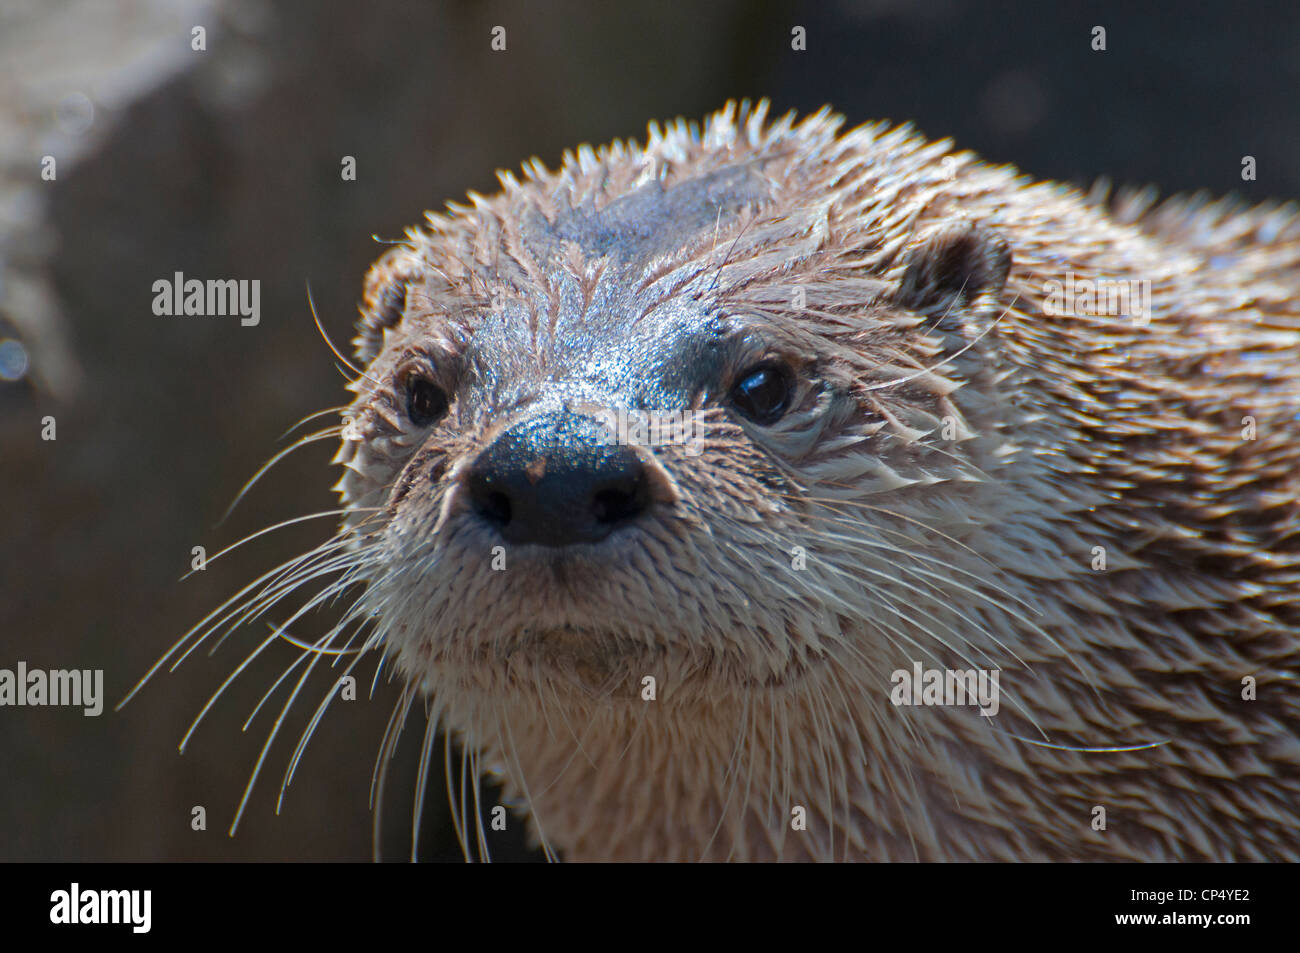 Close-up of a Northern River Otter. Stock Photo